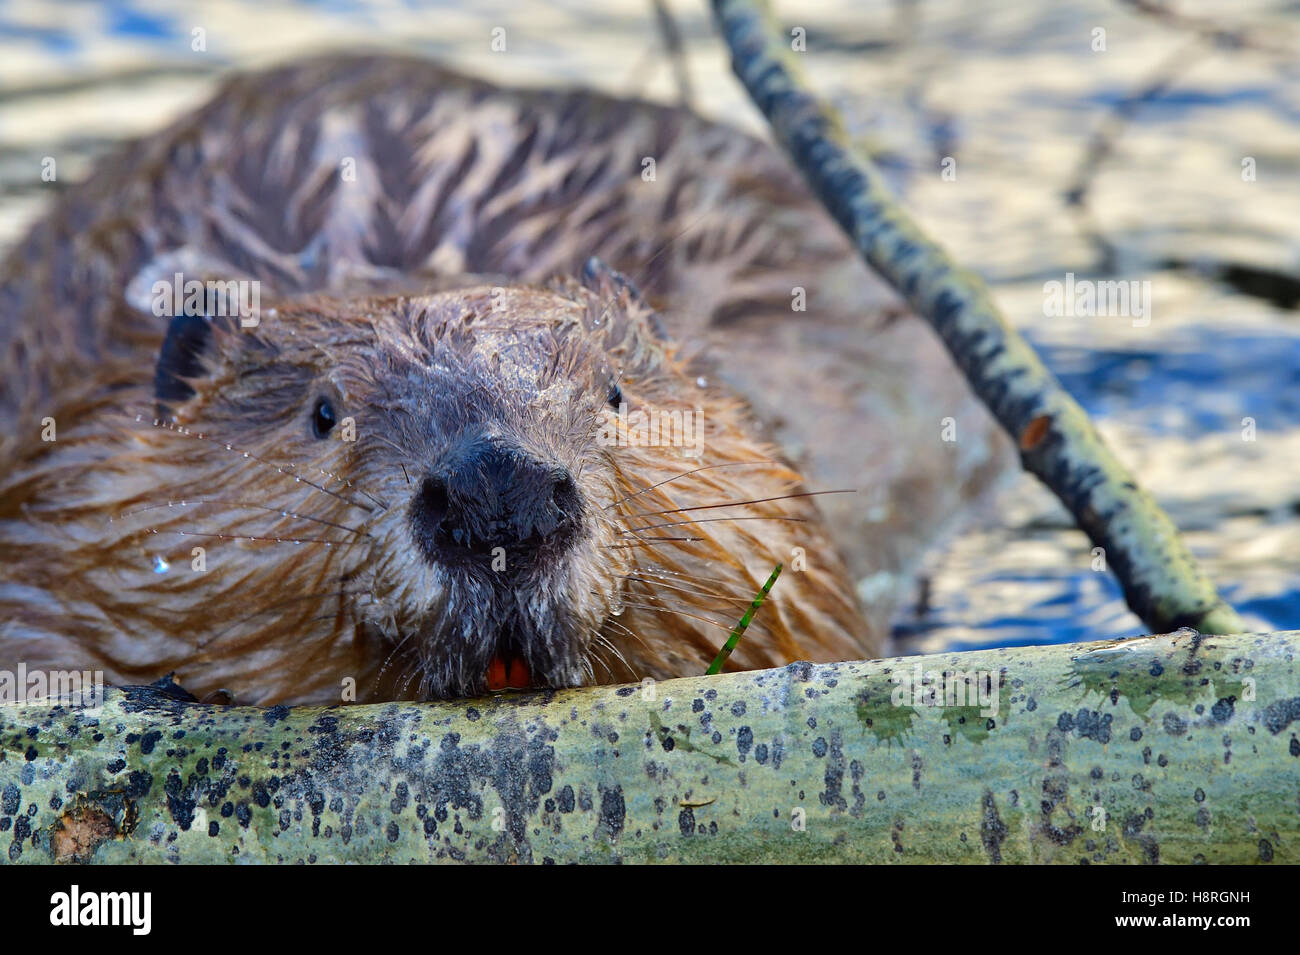 A close up image of a wild beaver looking up while biting an aspen tree in his pond near Hinton Alberta Canada Stock Photo